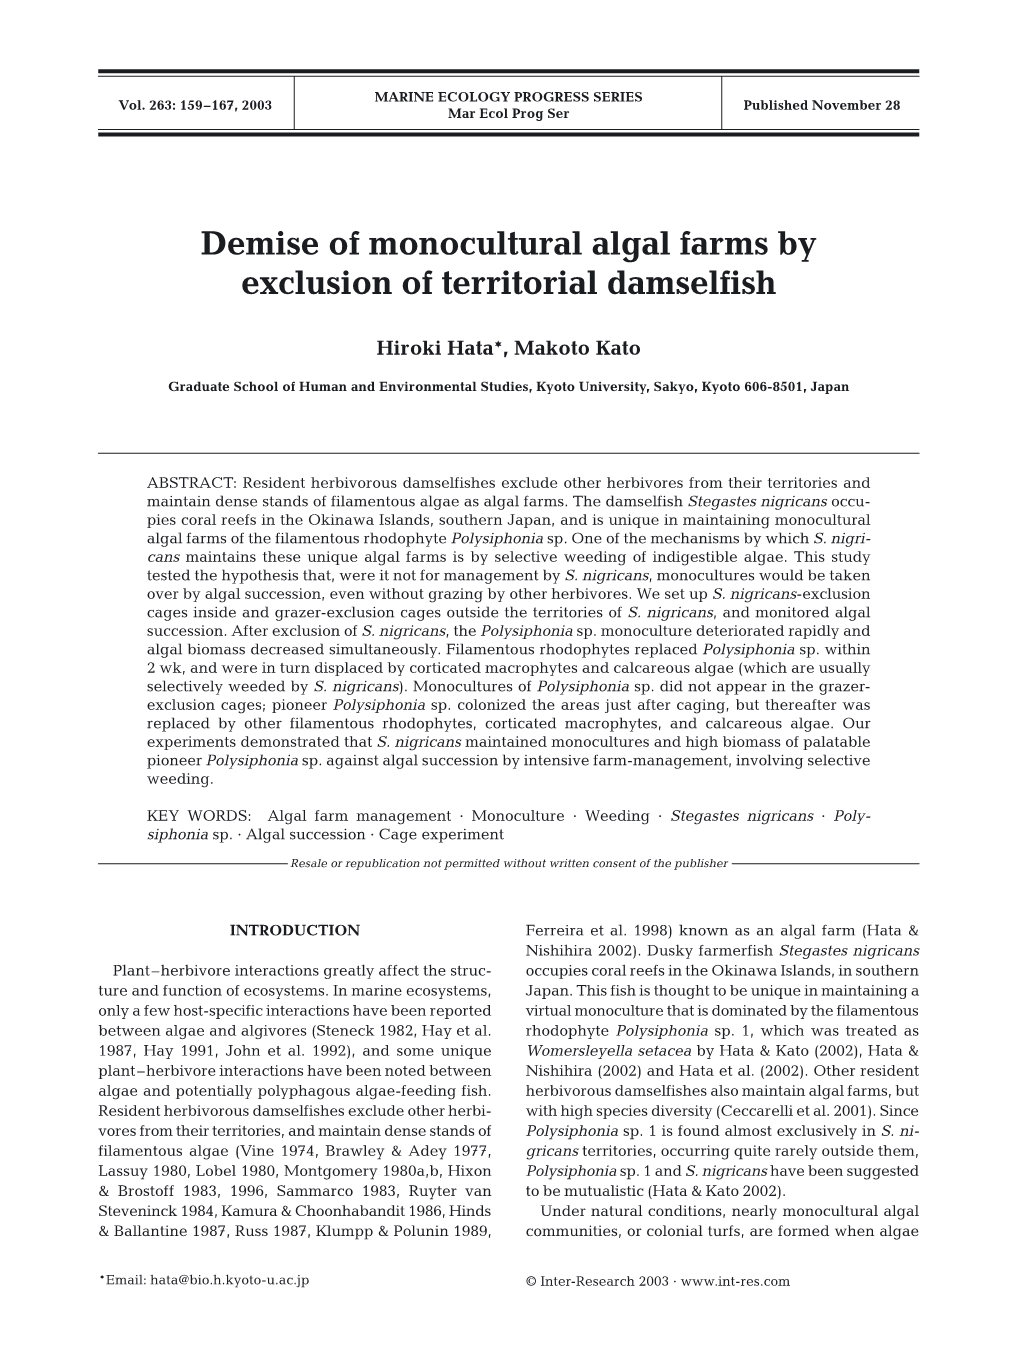 Demise of Monocultural Algal Farms by Exclusion of Territorial Damselfish